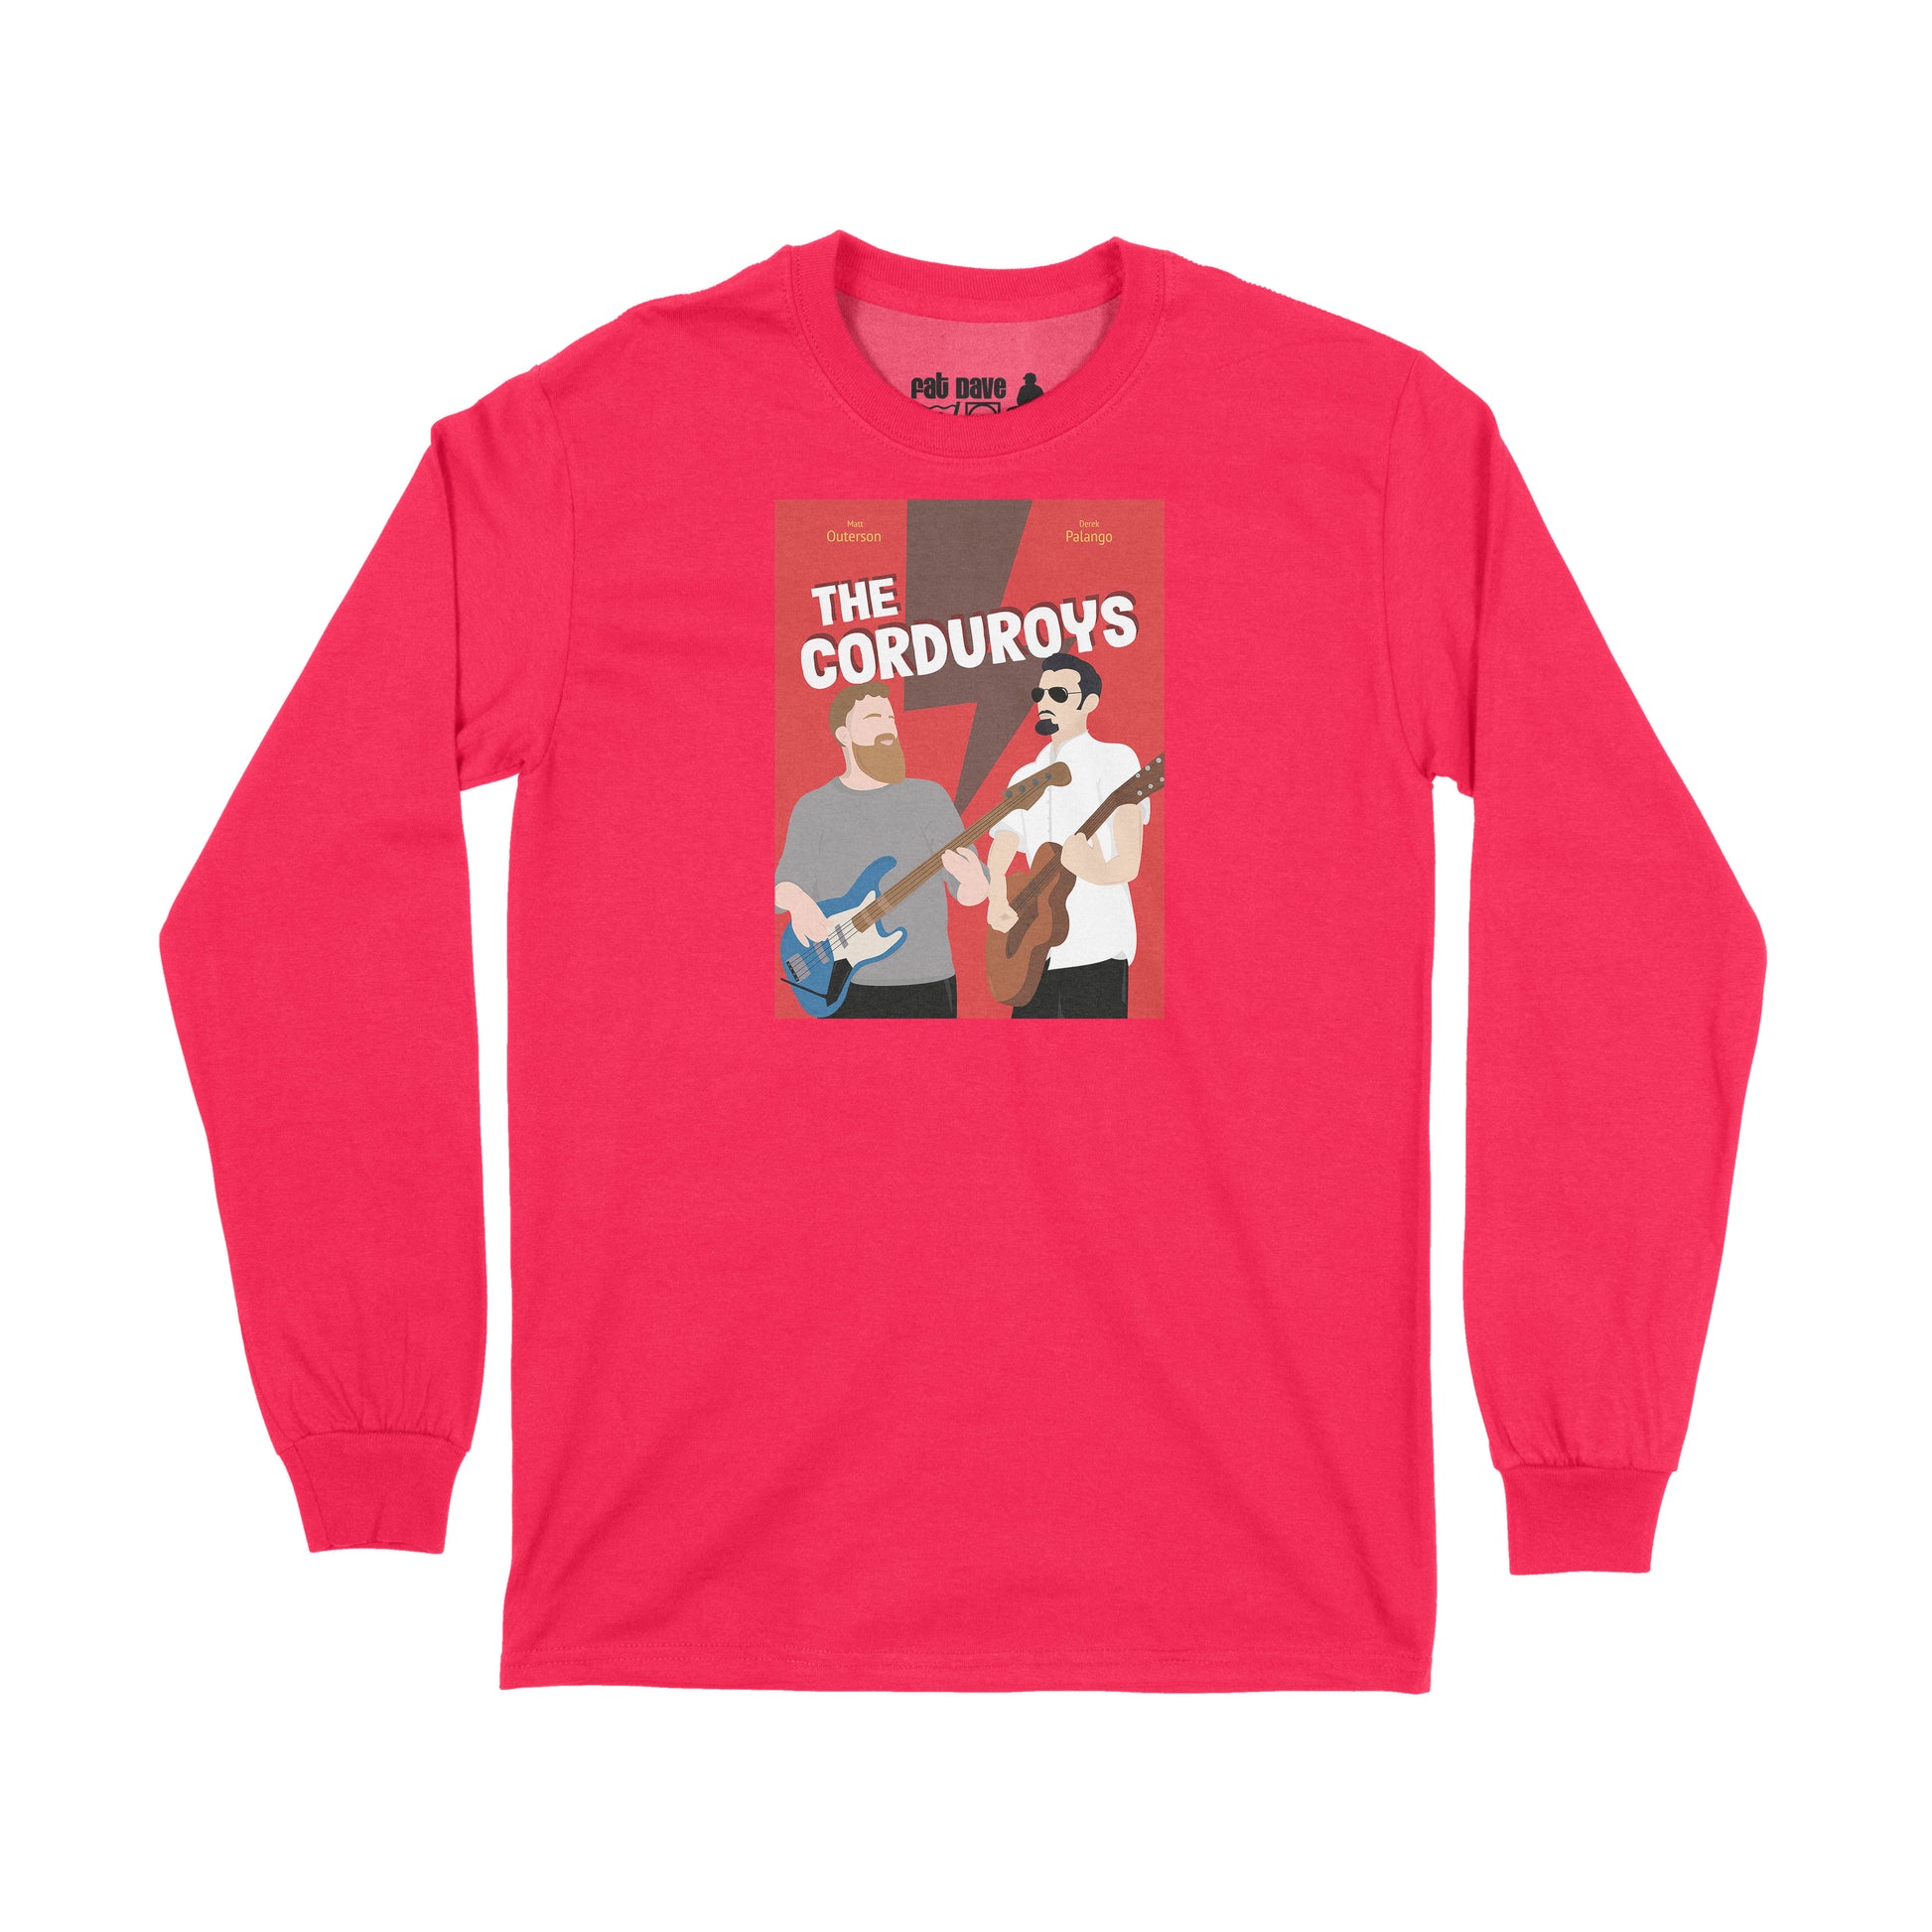 Brantford, Fat Dave, Long Sleeve T-Shirt, Musician, Poster, The Corduroys, Red